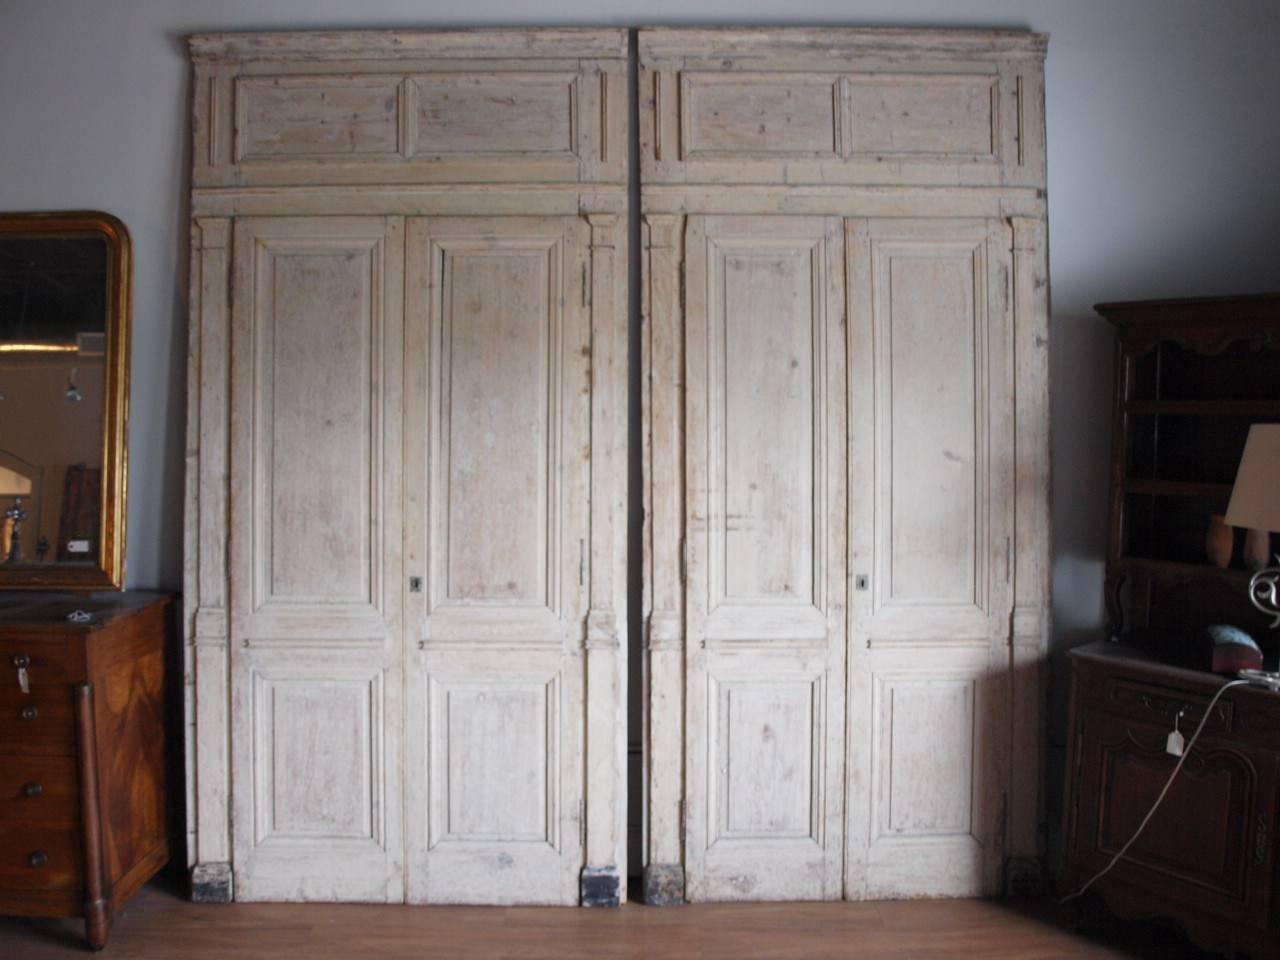 A very handsome pair of early 19th century Directoire period boiseries door panels in painted pine wood, circa 1820. Wonderful to build in to enclose shelving or to install as doors. They are slightly different in size. One set measures: 121 1/2